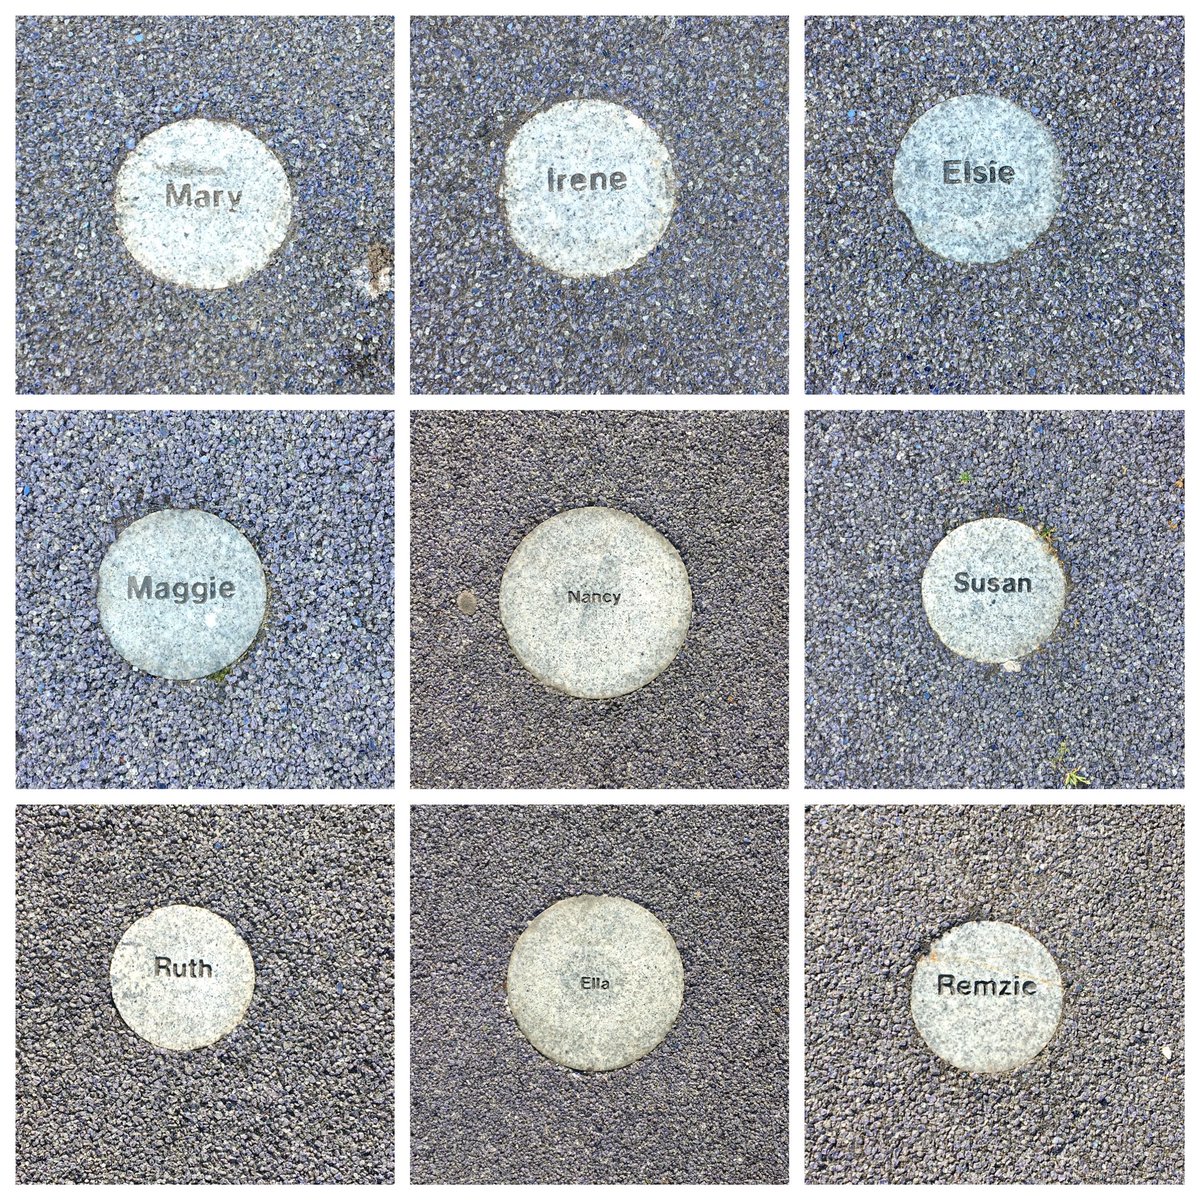 Outside  @maryhill_halls (shown yesterday) Star Map, an art work created by WAVEparticle, incorporates a constellation of names, many of women, of the “great and the good” of Maryhill. What a lovely way to be recognised!  #WomenMakeHistory  @womenslibrary